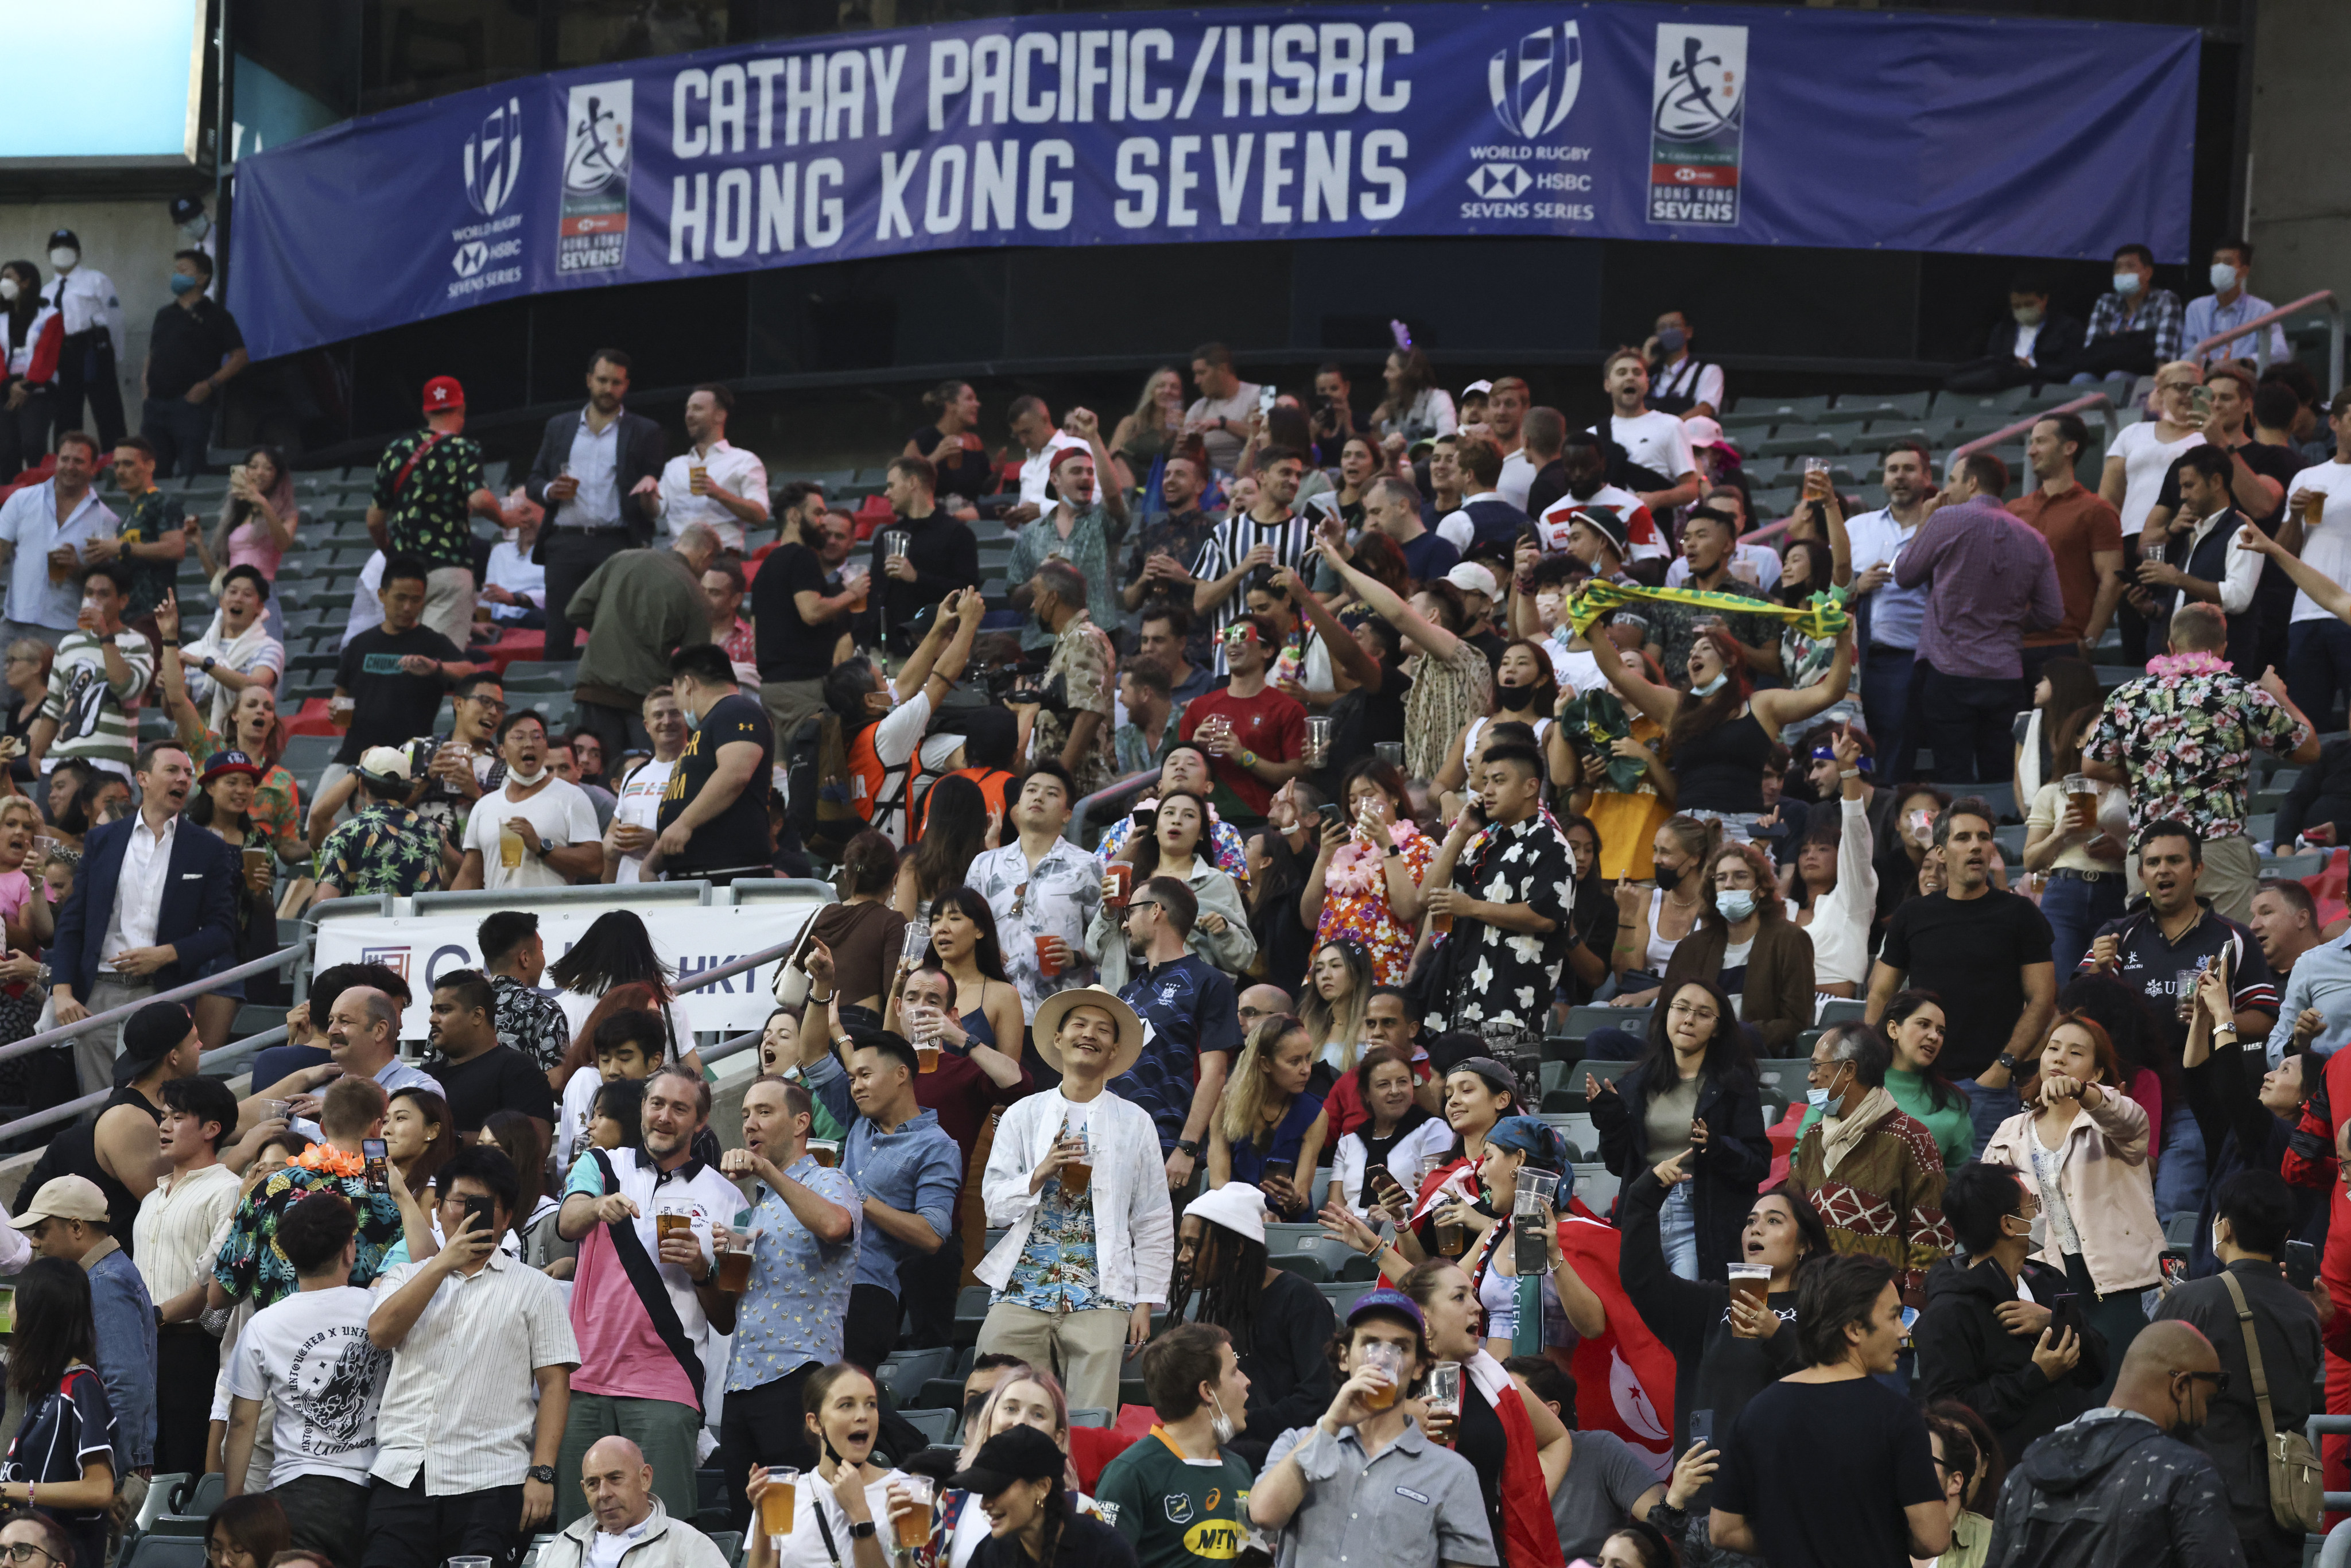 Rugby fans on day 1 of the 2022 Hong Kong Sevens. Photo: K.Y. Cheng